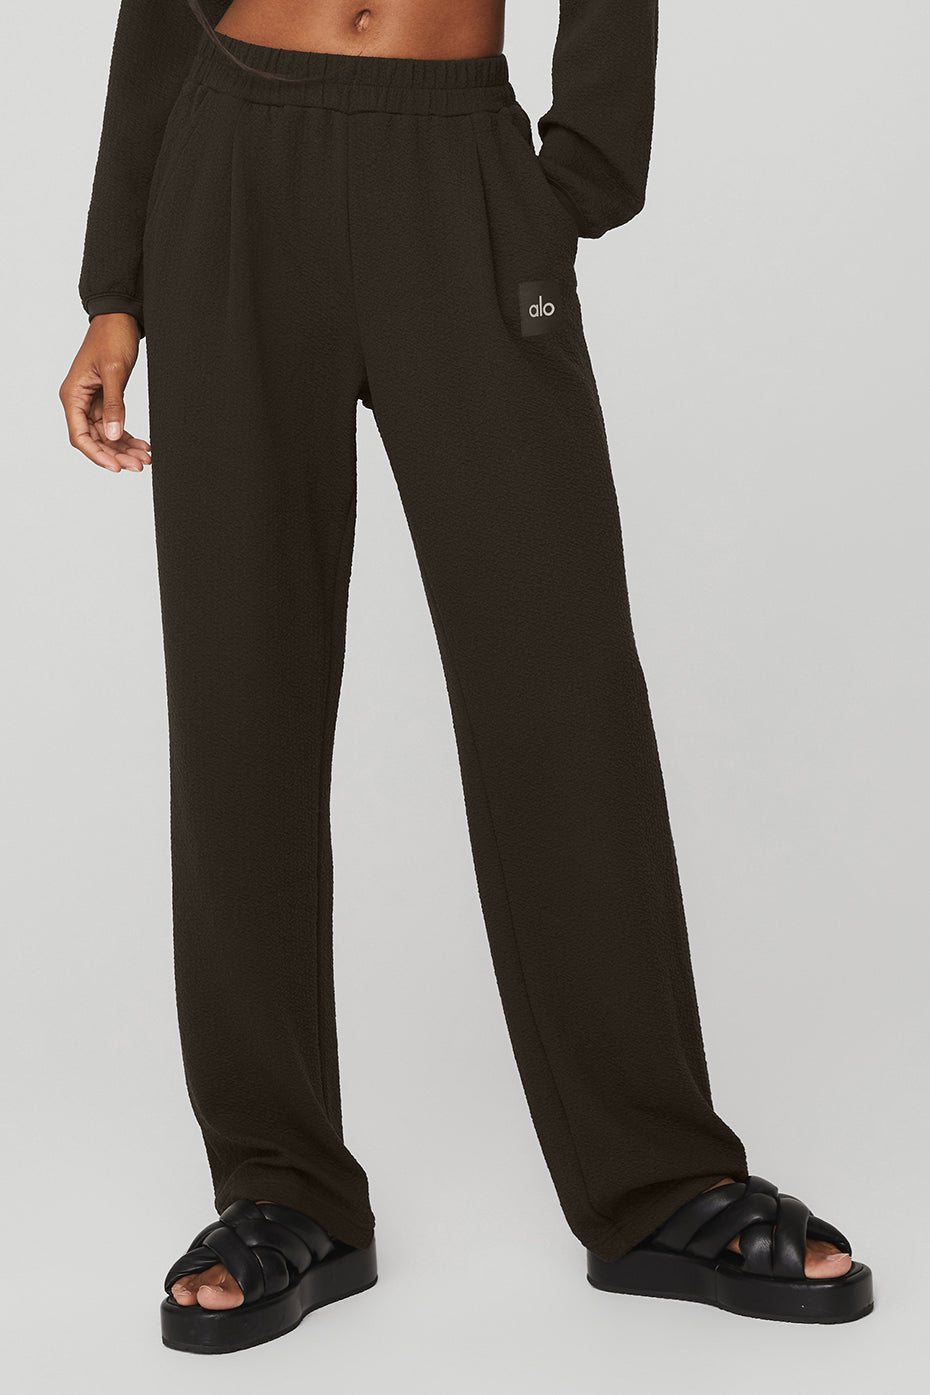 High-Waist Tailored Sweatpant in Espresso by Alo Yoga - Work Well Daily